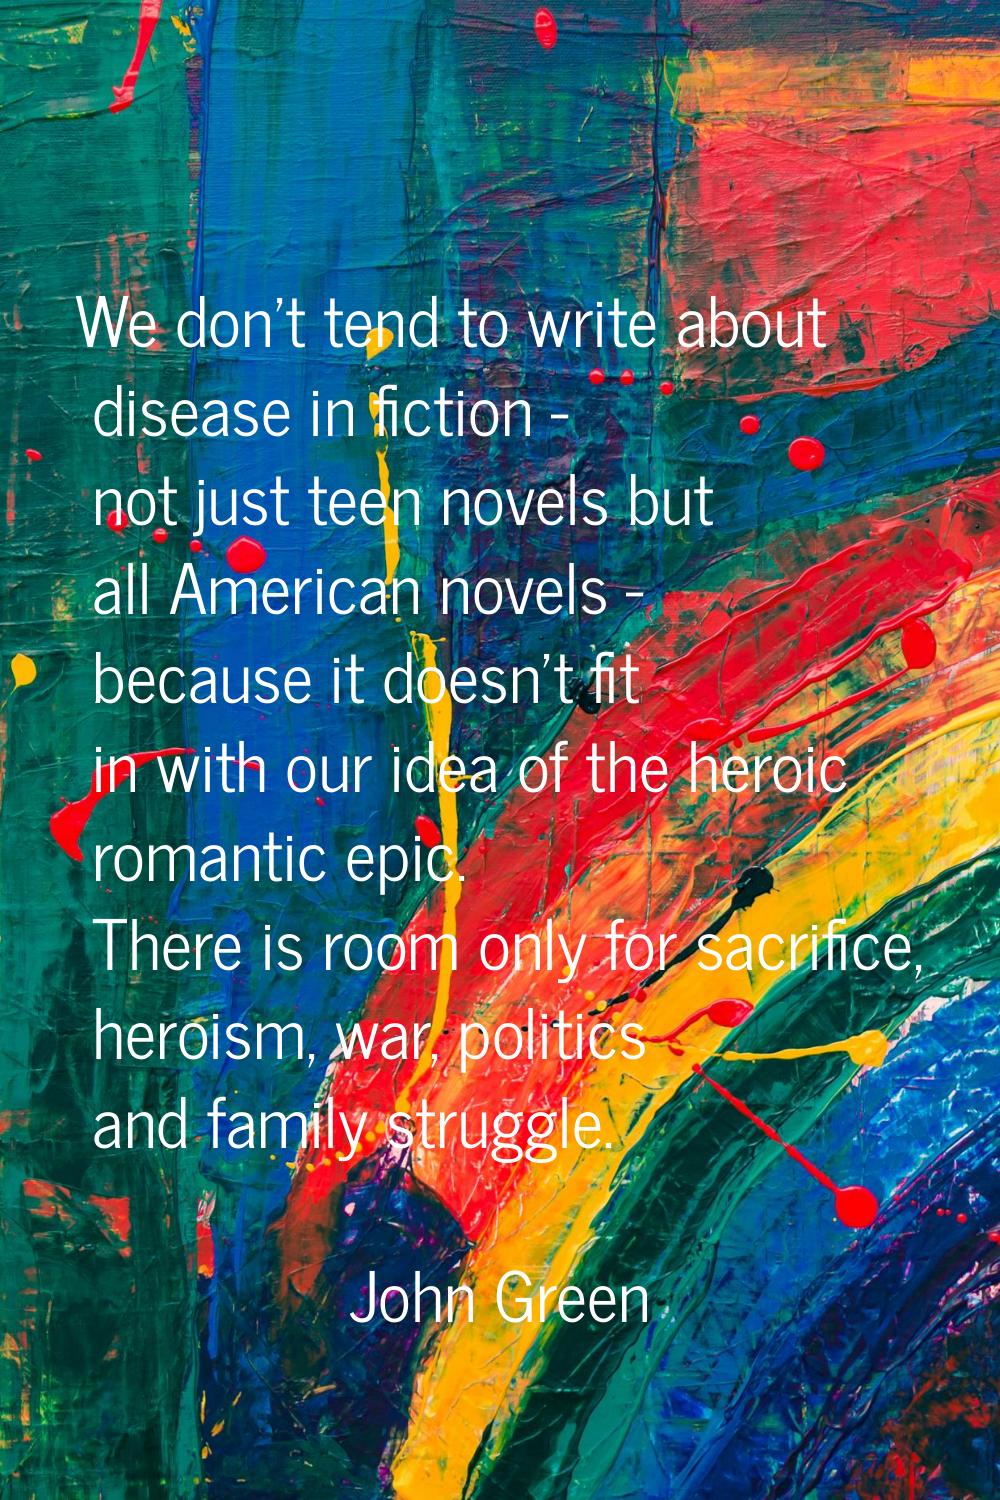 We don't tend to write about disease in fiction - not just teen novels but all American novels - be